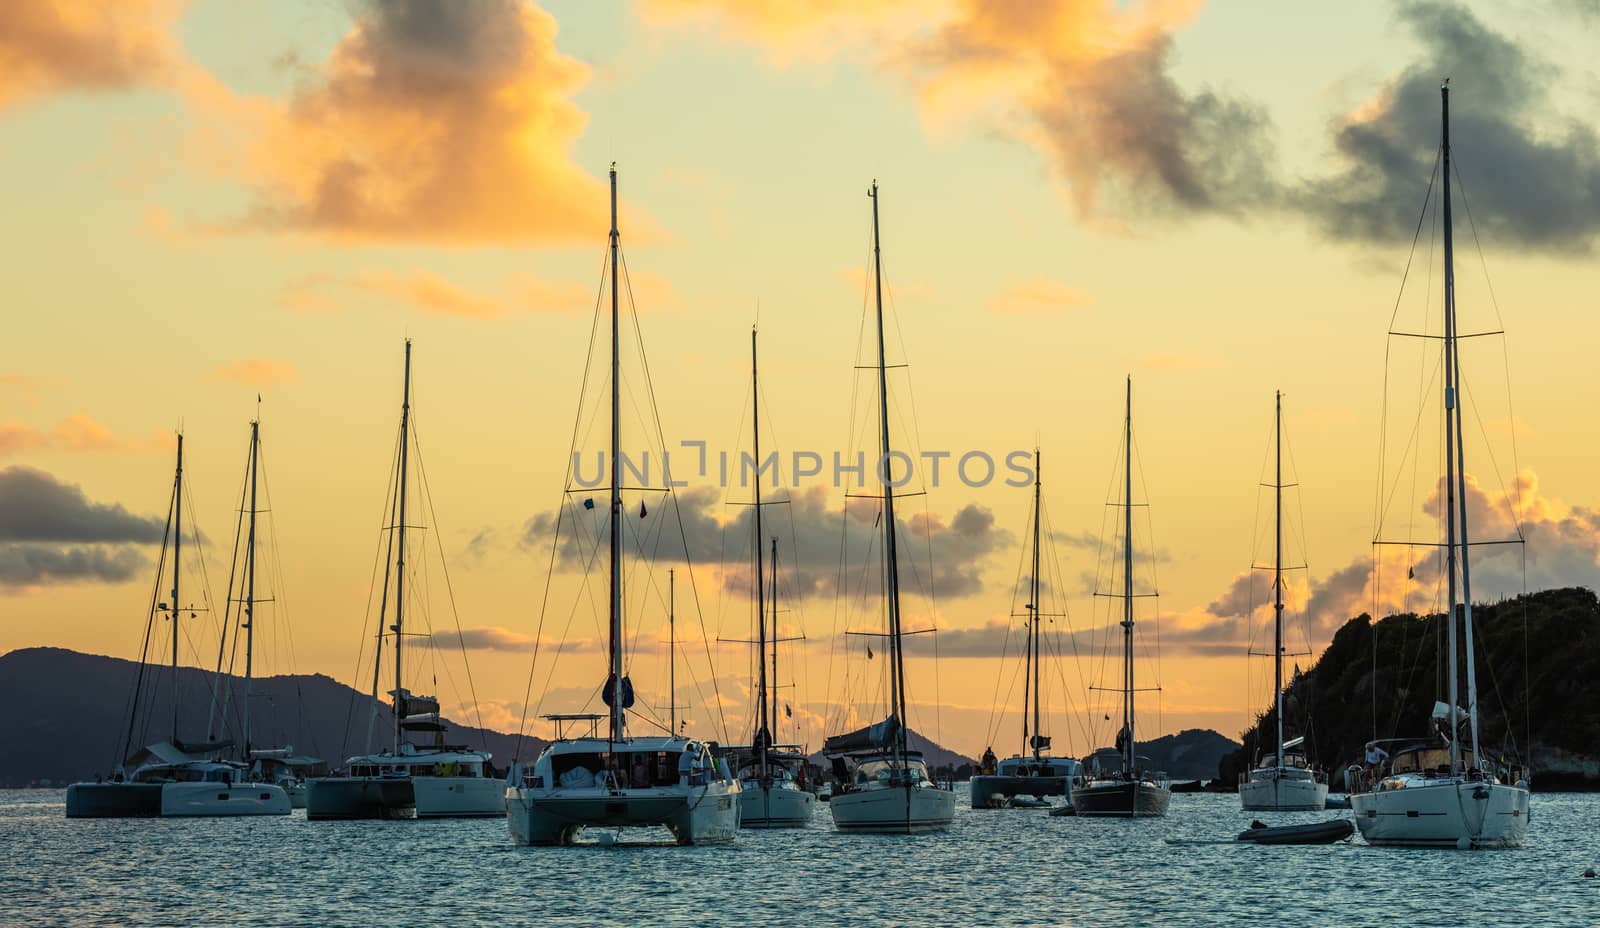 Sunset panorama with lots of parked yachts and catamarans, Tobago Cays, Saint Vincent and the Grenadines, Caribbean sea